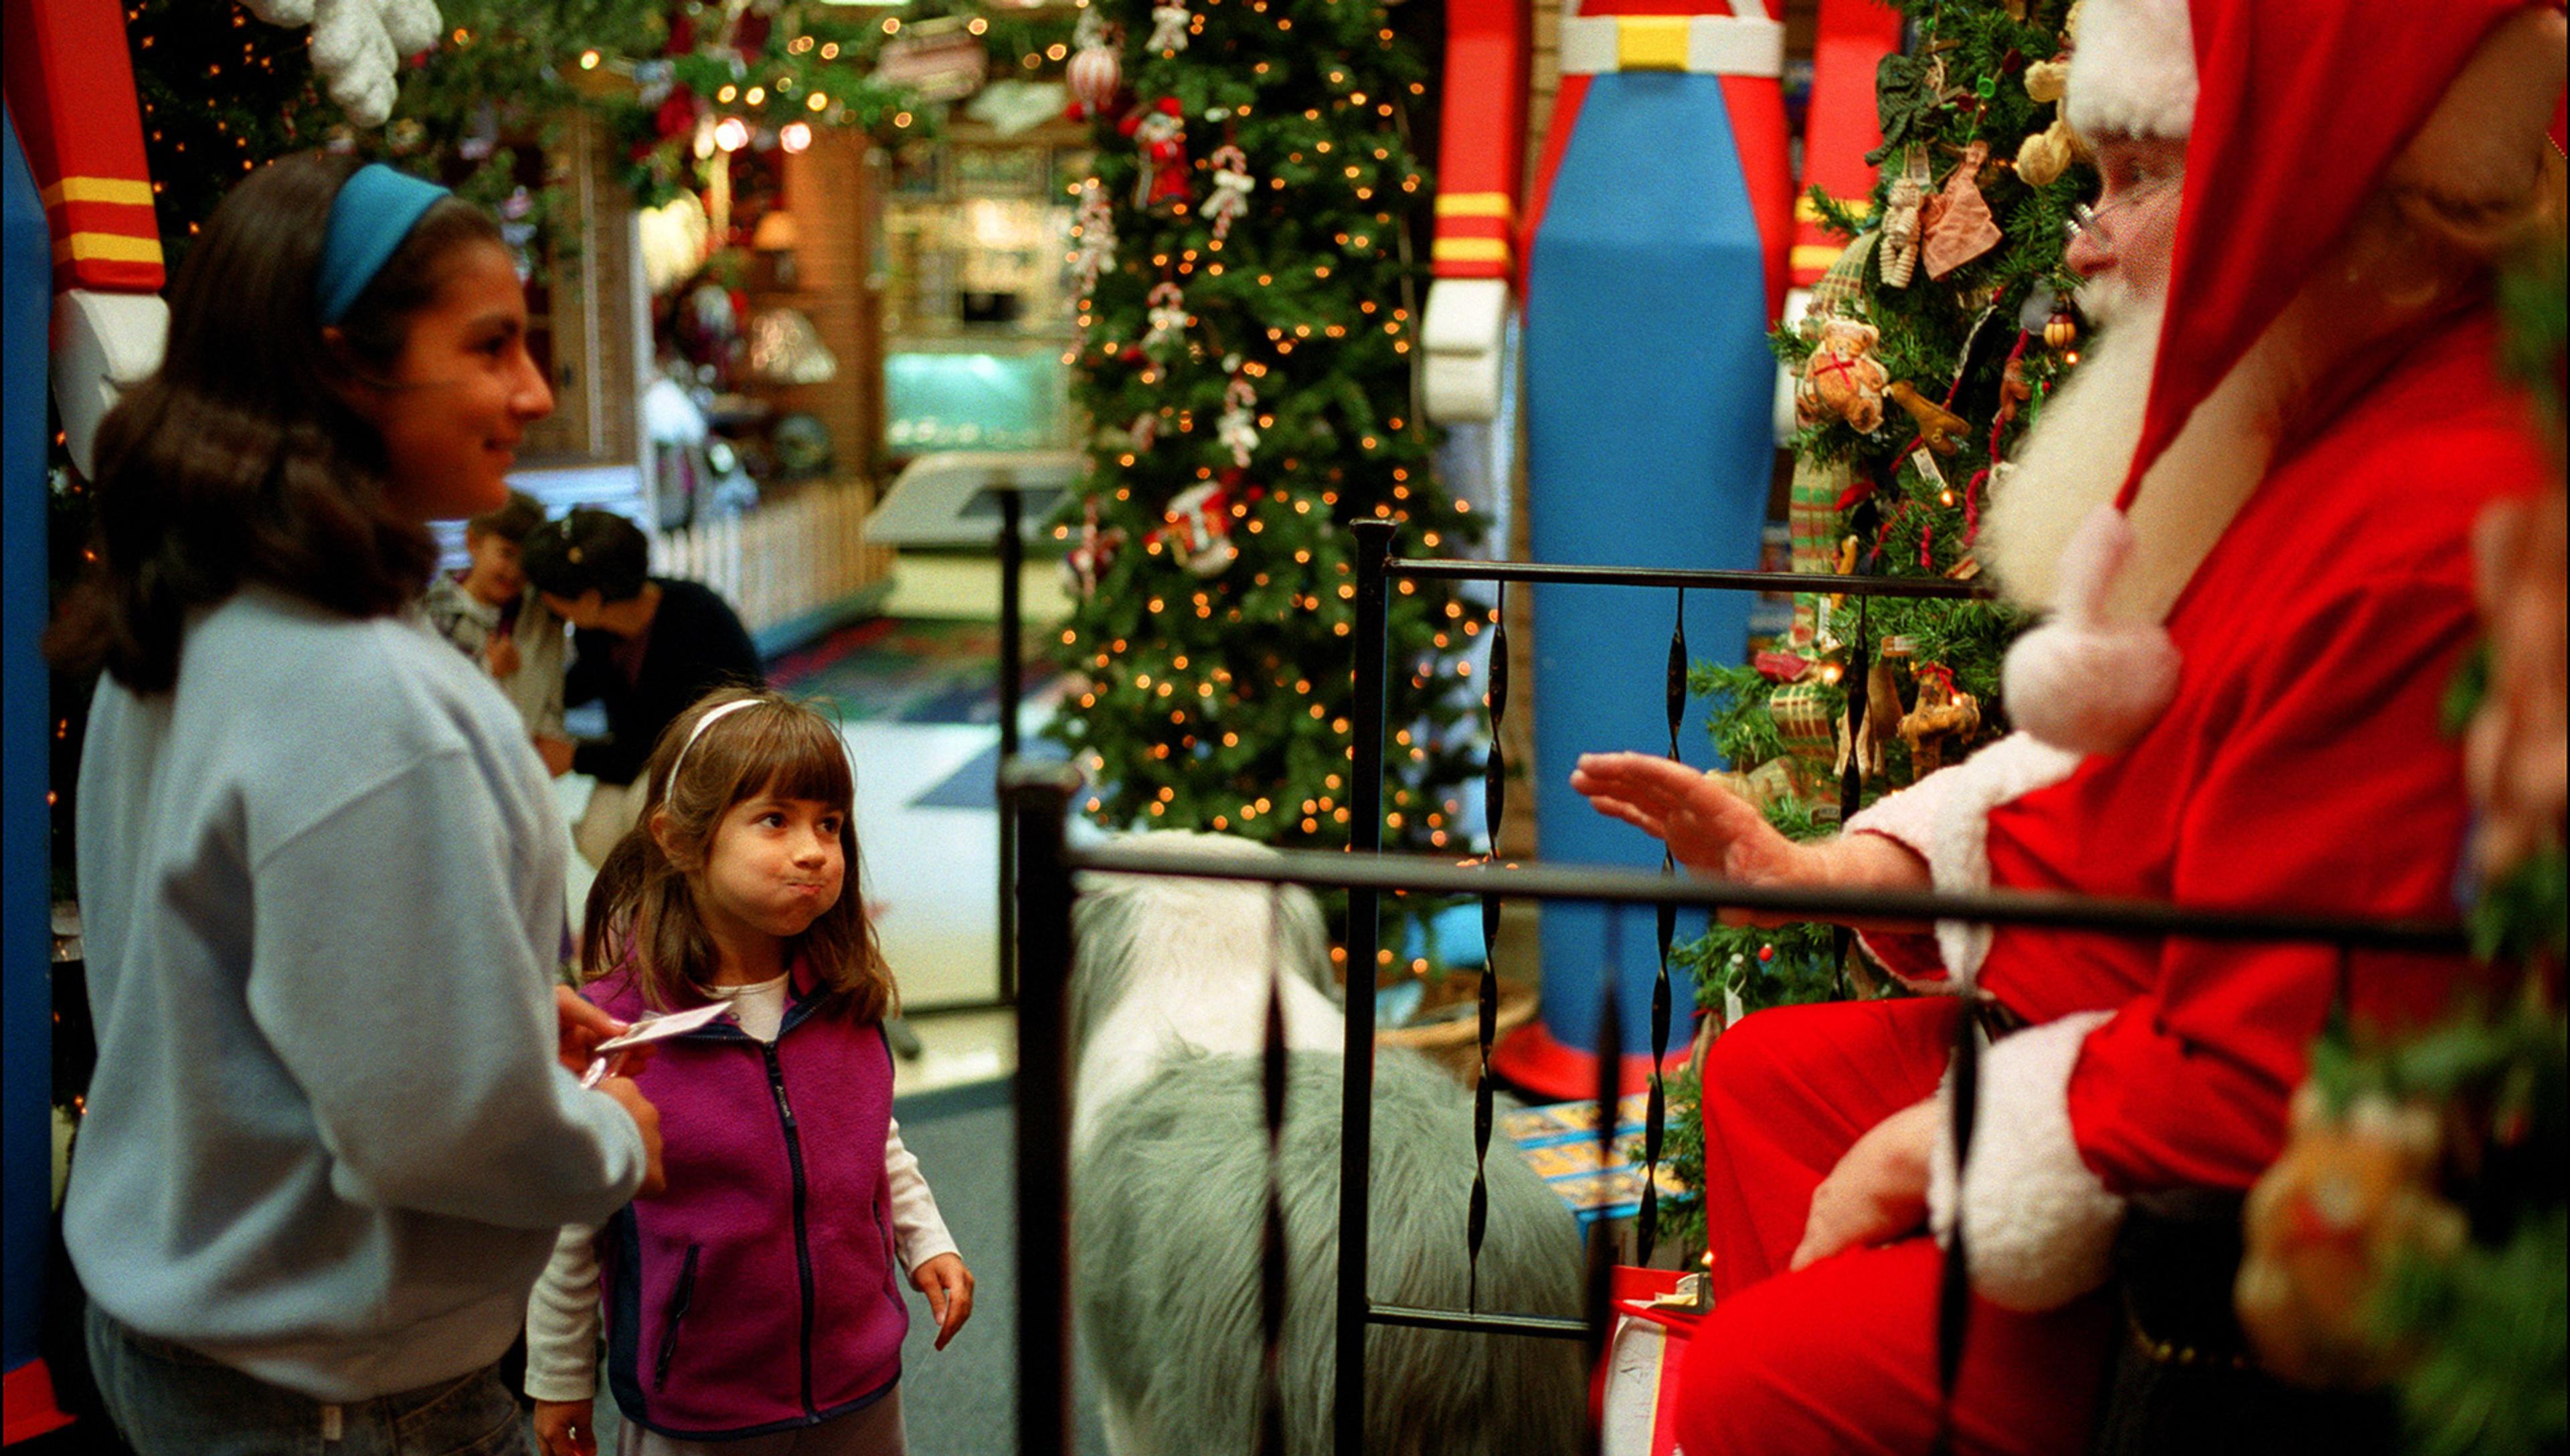 A child meeting Santa in a mall looks disbelieving